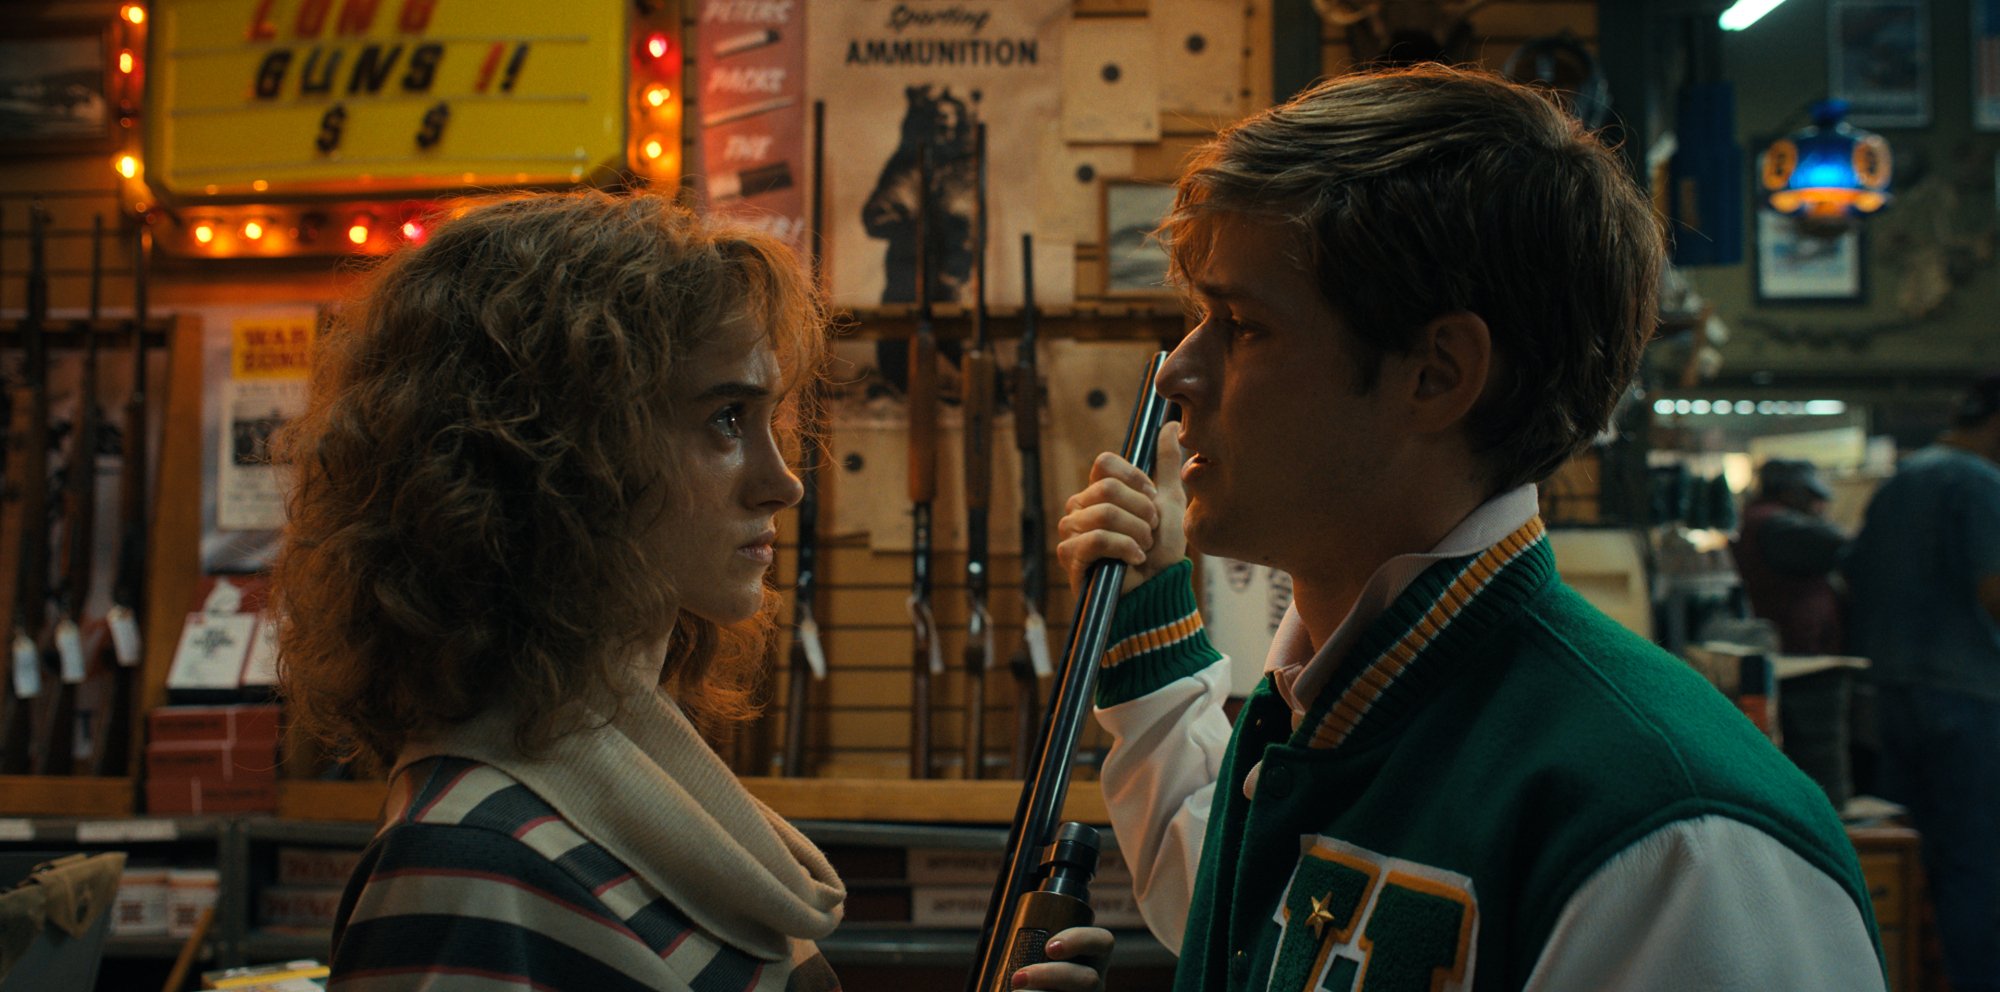 A young woman holds a shotgun in a gun store, and a young man in a letterman jacket holds the barrel.